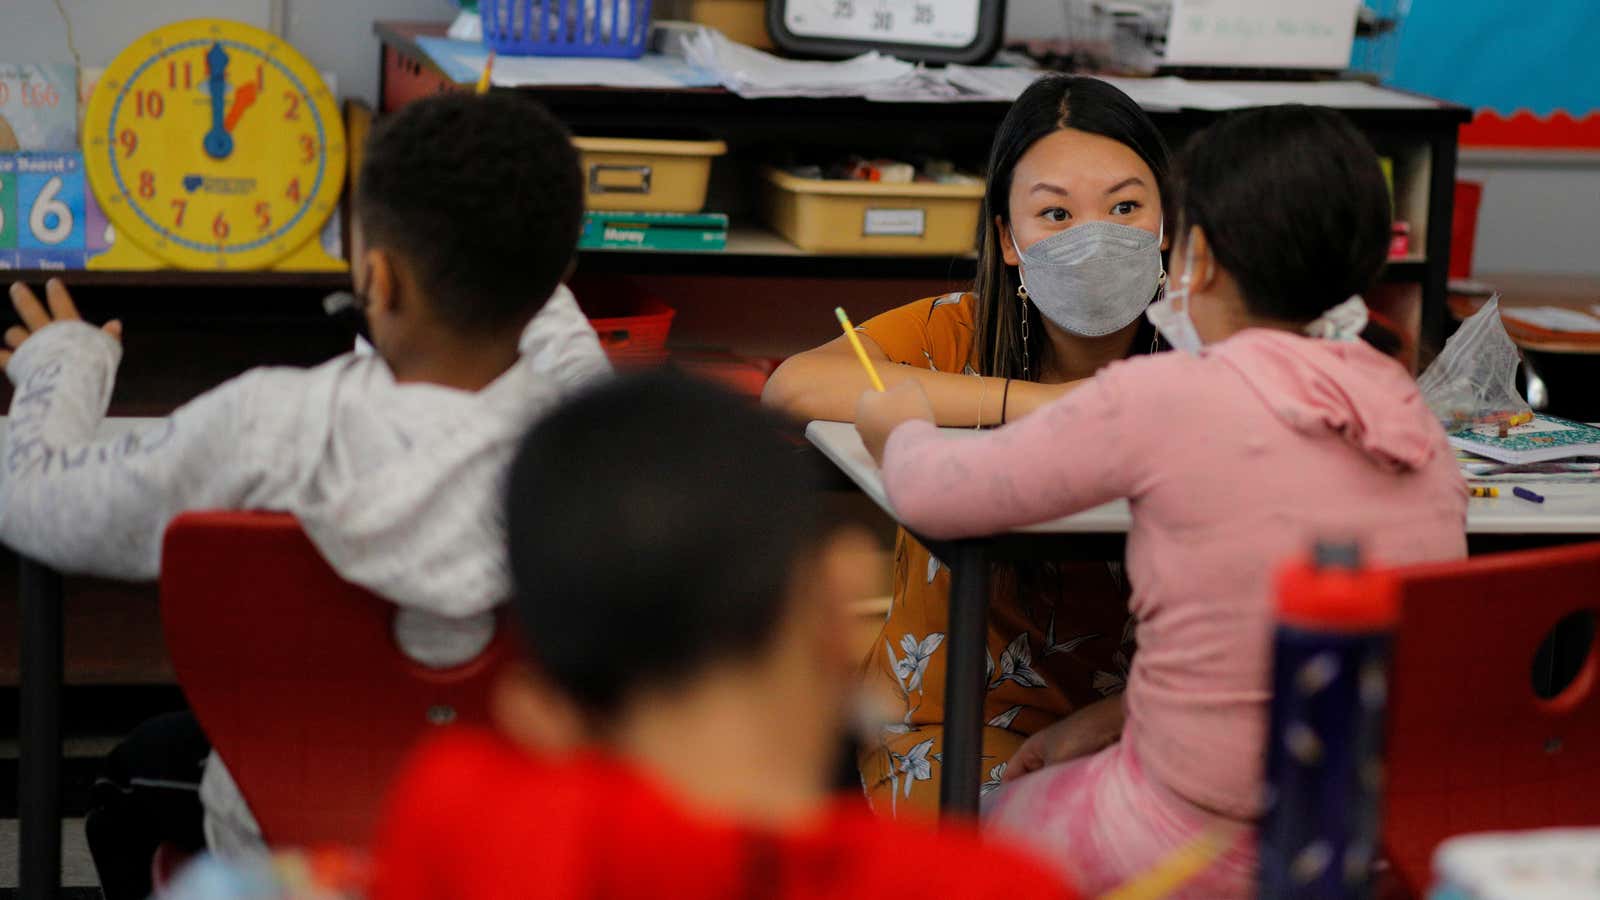 Teachers have faced high levels of stress and burnout throughout the pandemic.